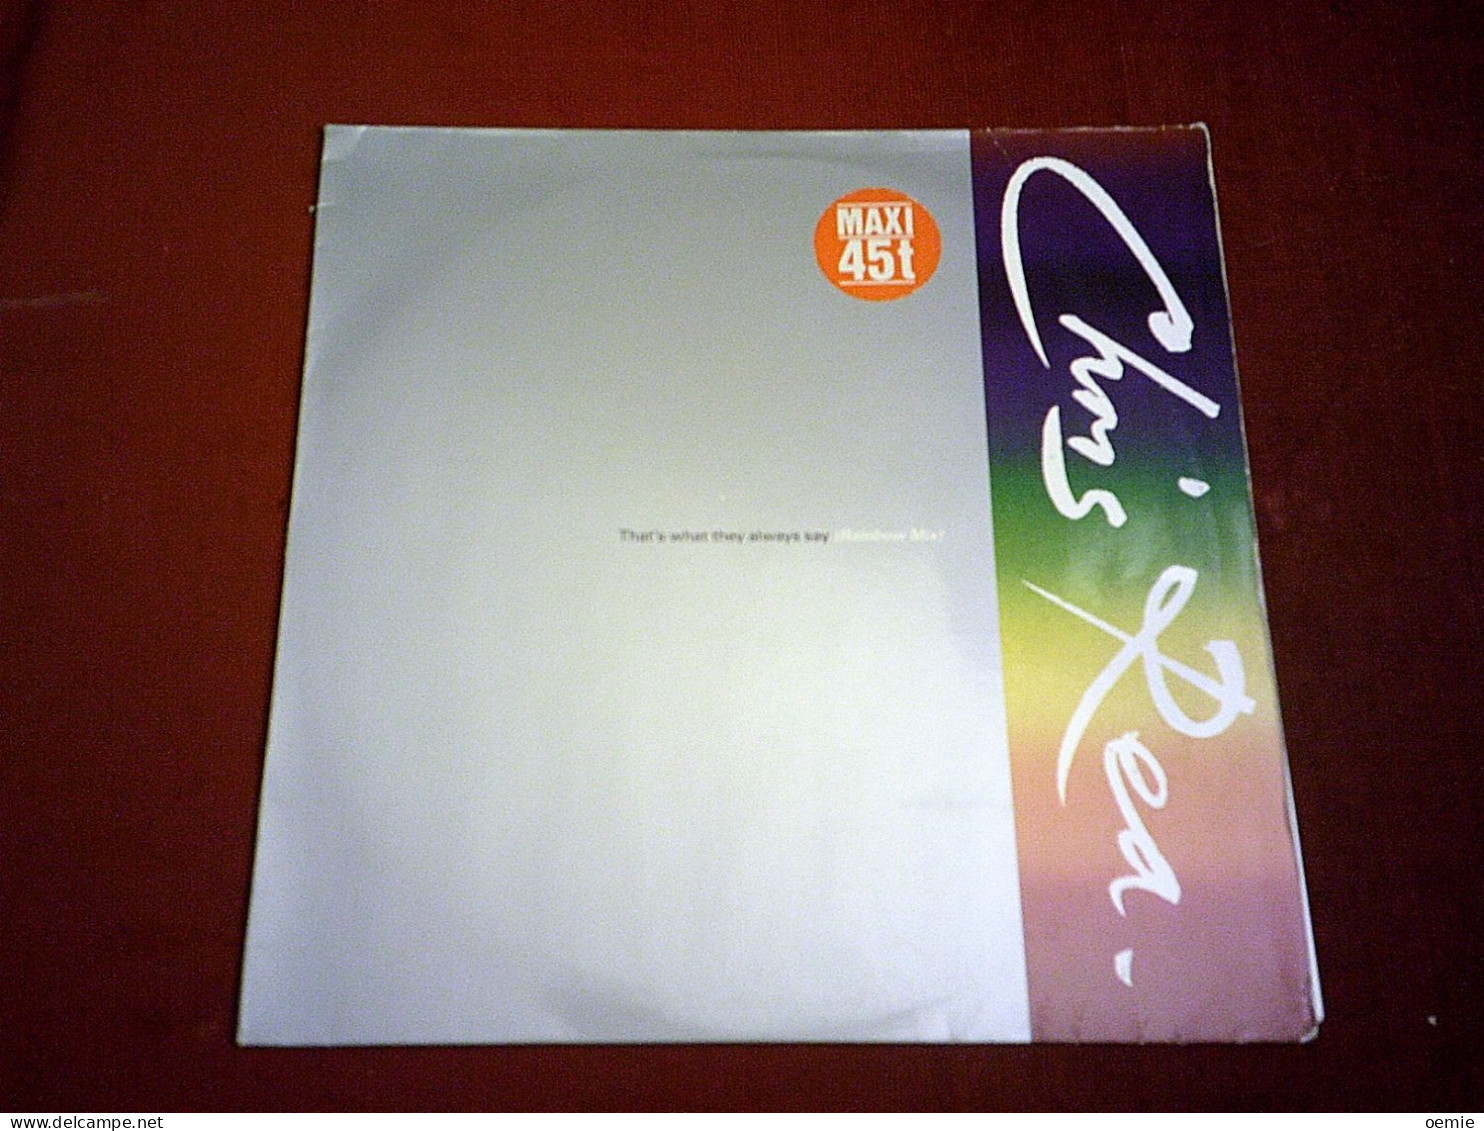 CHRIS REA   / THAT'S WHAT THEY ALWAYS SAY ( RAINBOW MIX ) - 45 Toeren - Maxi-Single